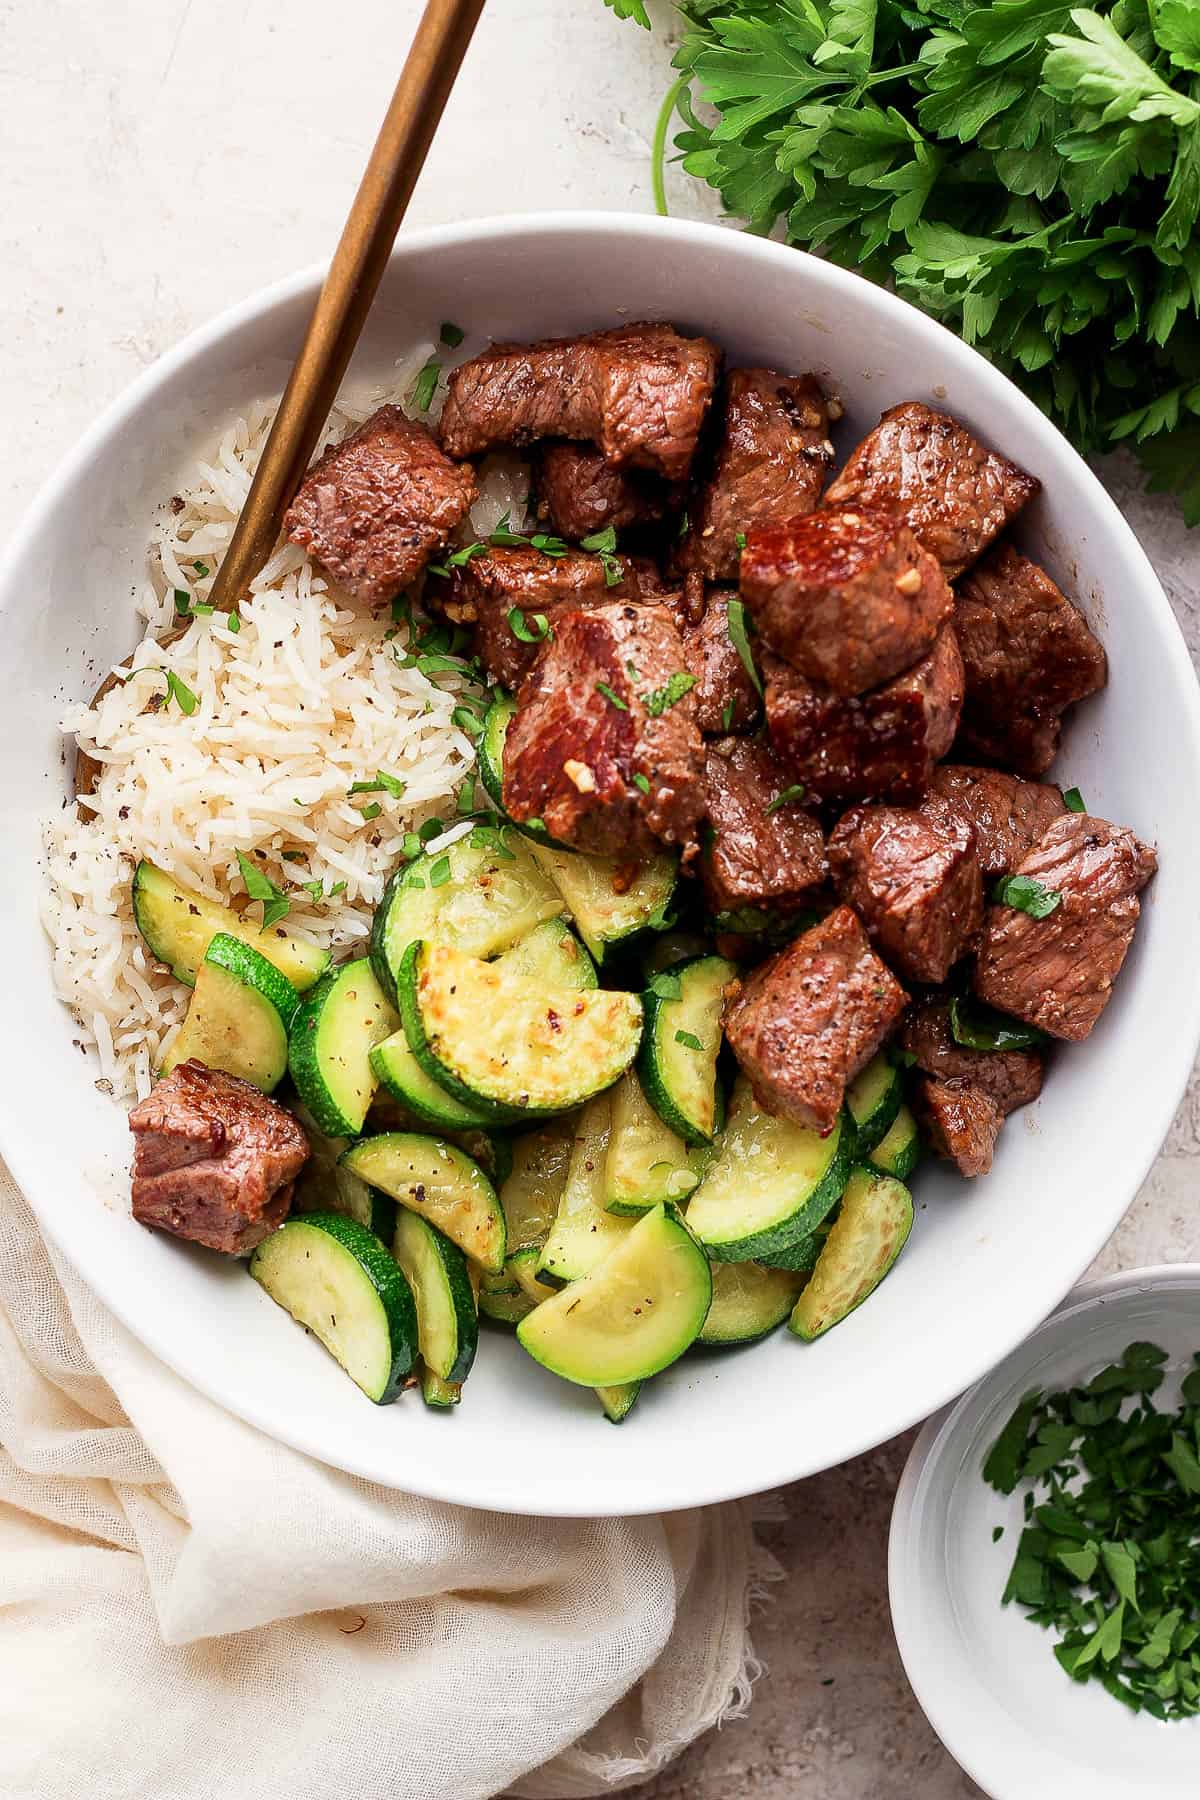 Garlic butter steak bites in a white bowl with white rice and zucchini.